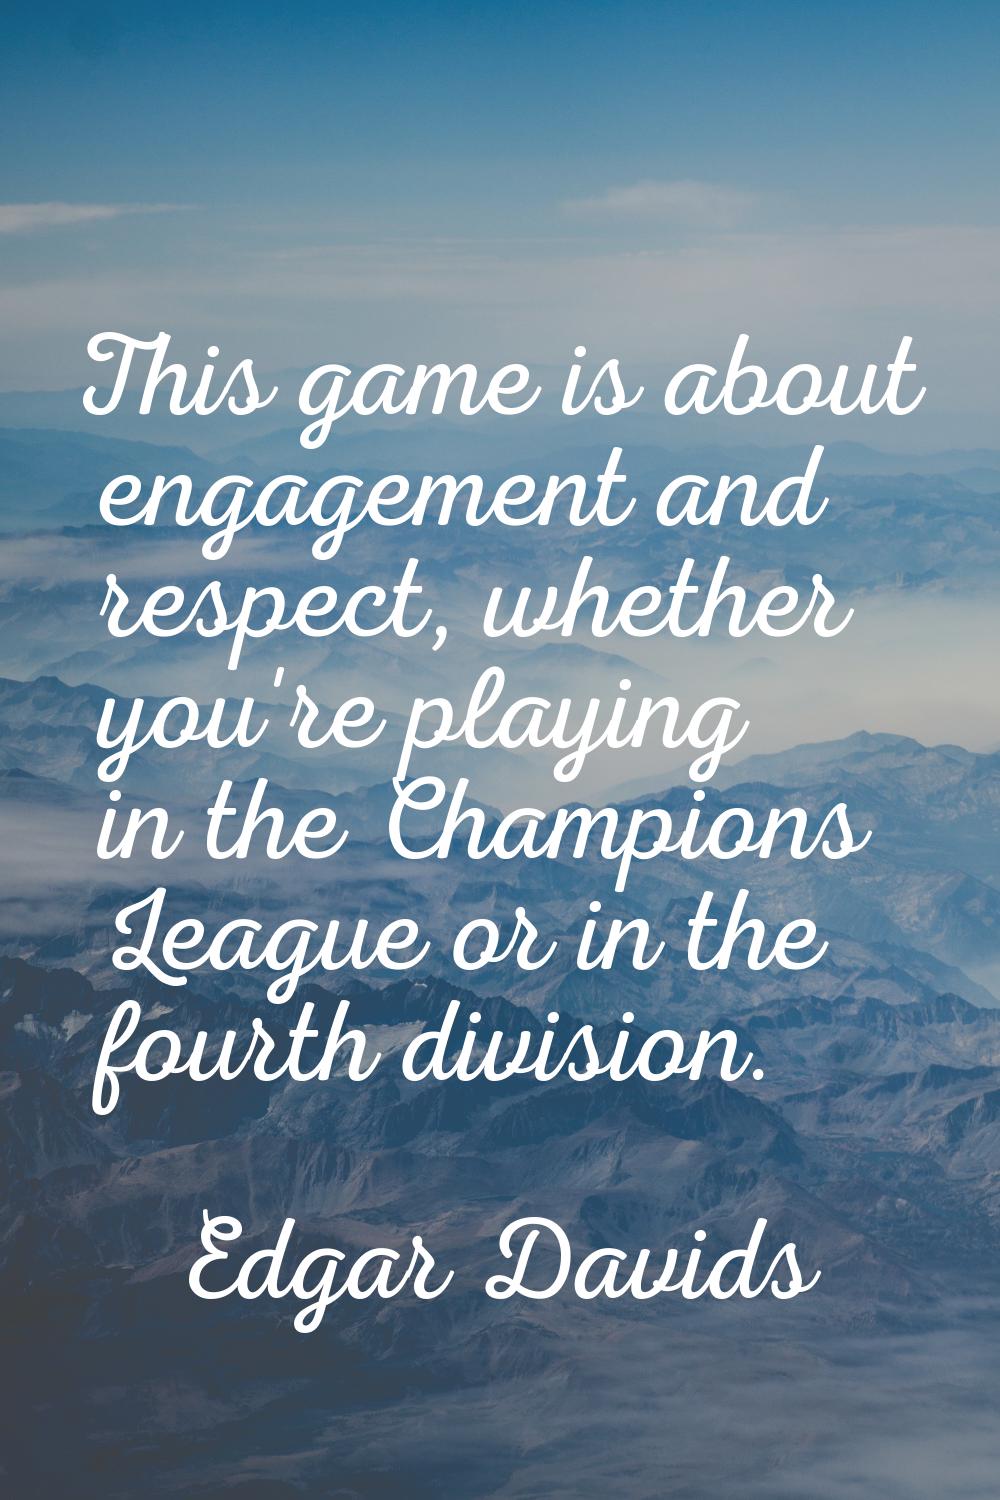 This game is about engagement and respect, whether you're playing in the Champions League or in the